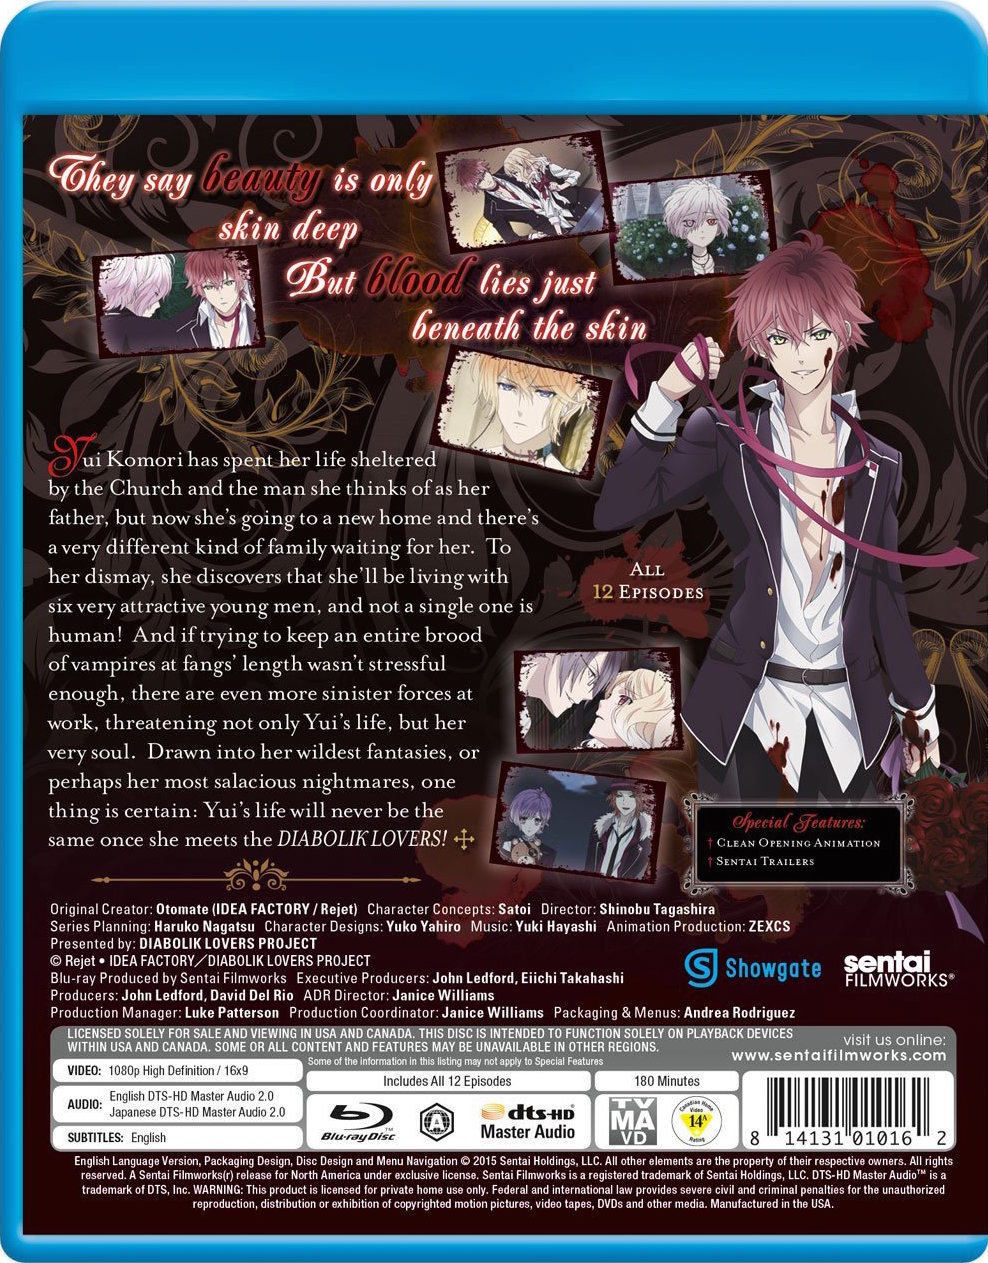 Diabolik Lovers: Complete Collection Blu-ray